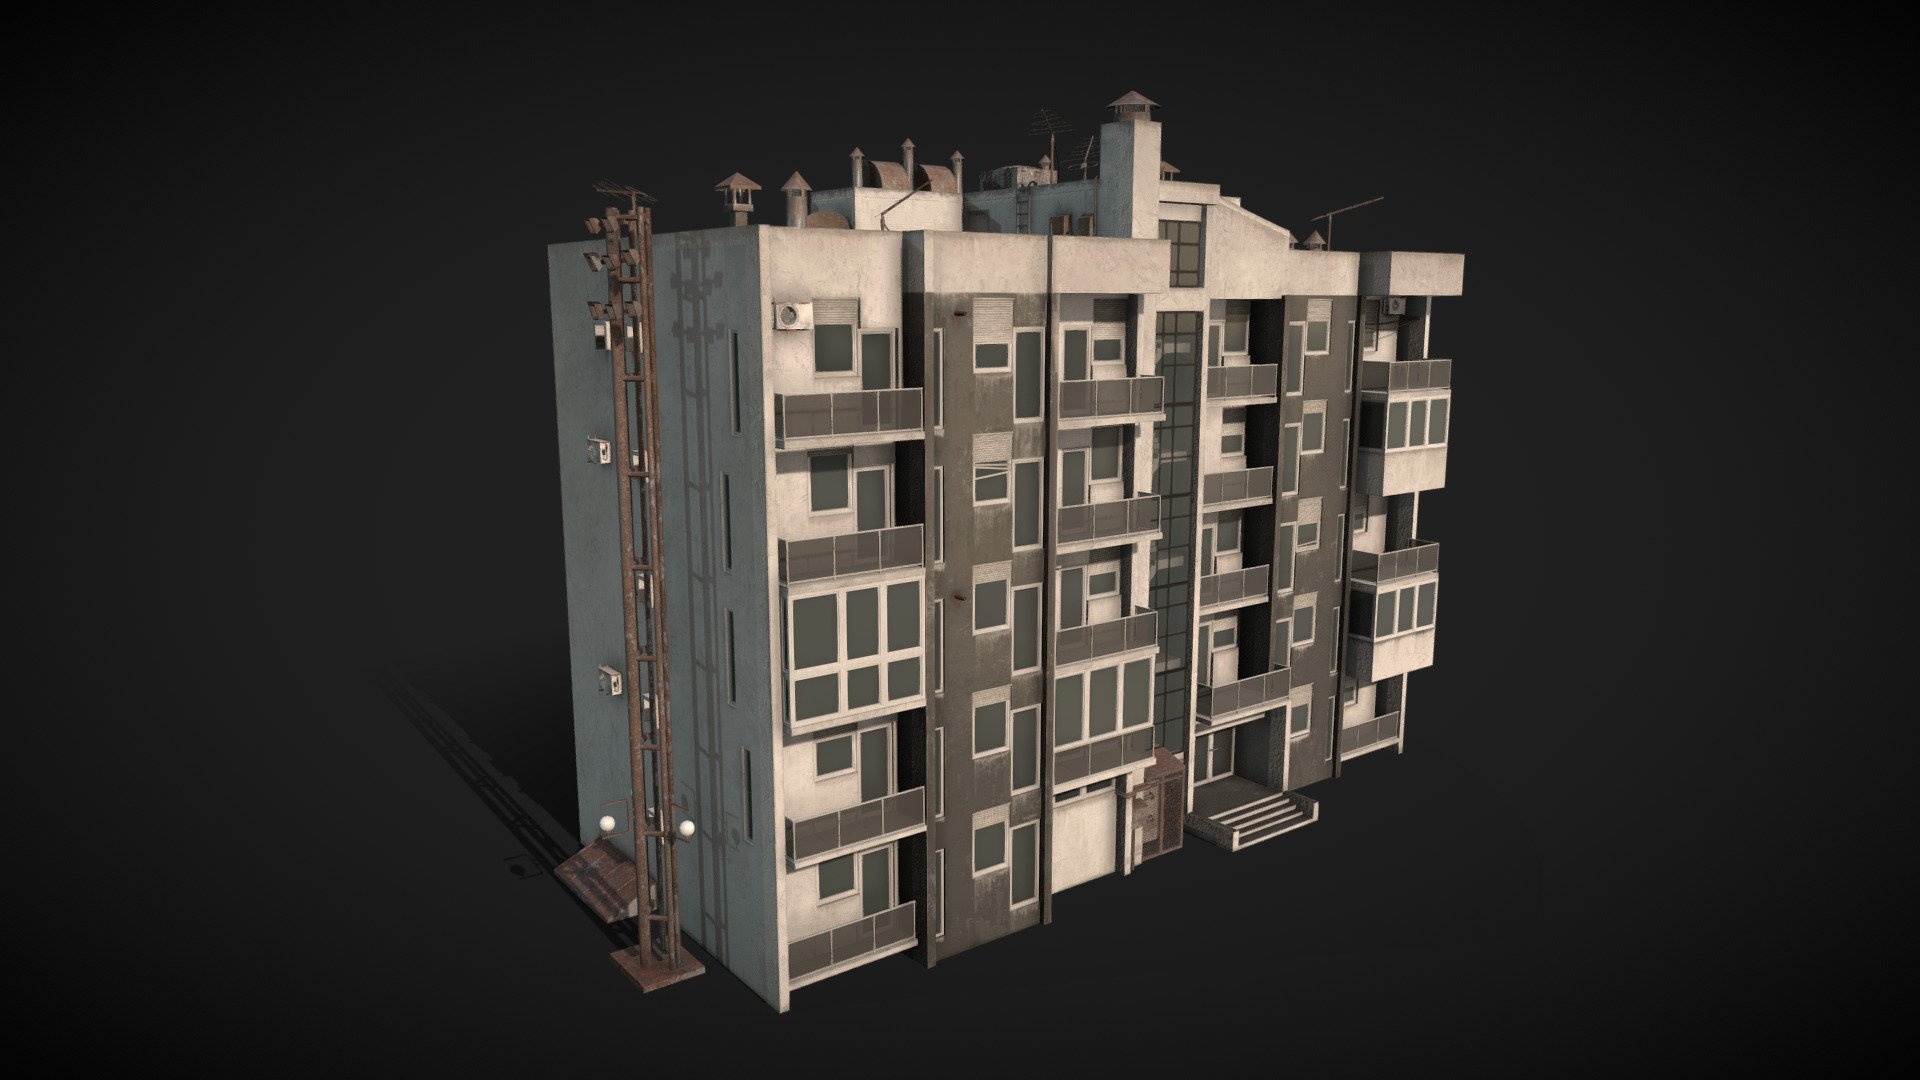 Realistic 3d model of a worn residental building. 4k textures. 
I've put alot of effort into this one 3d model